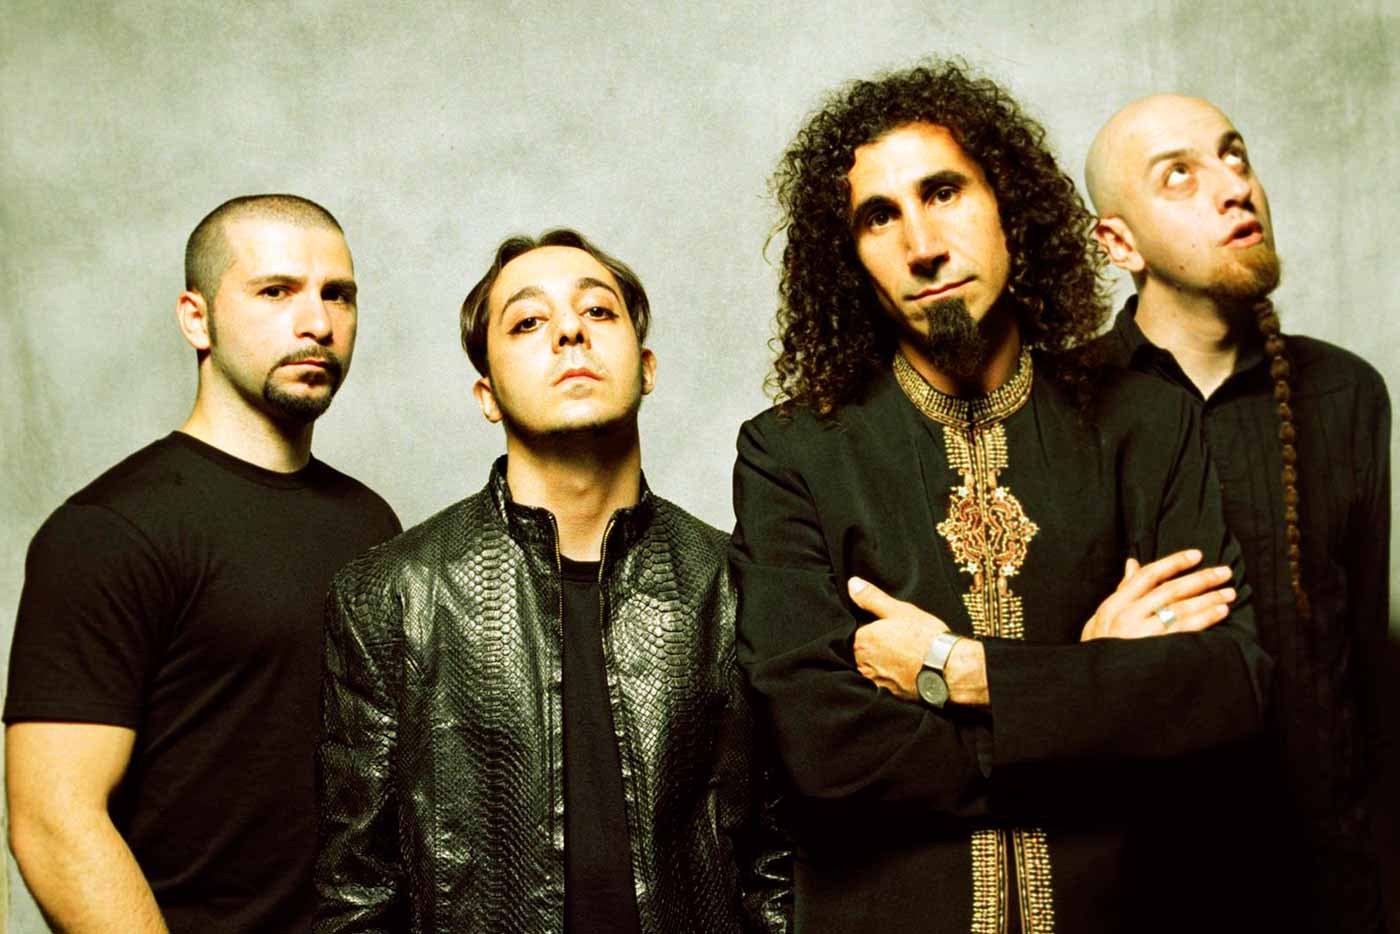 will system of a down ever tour again